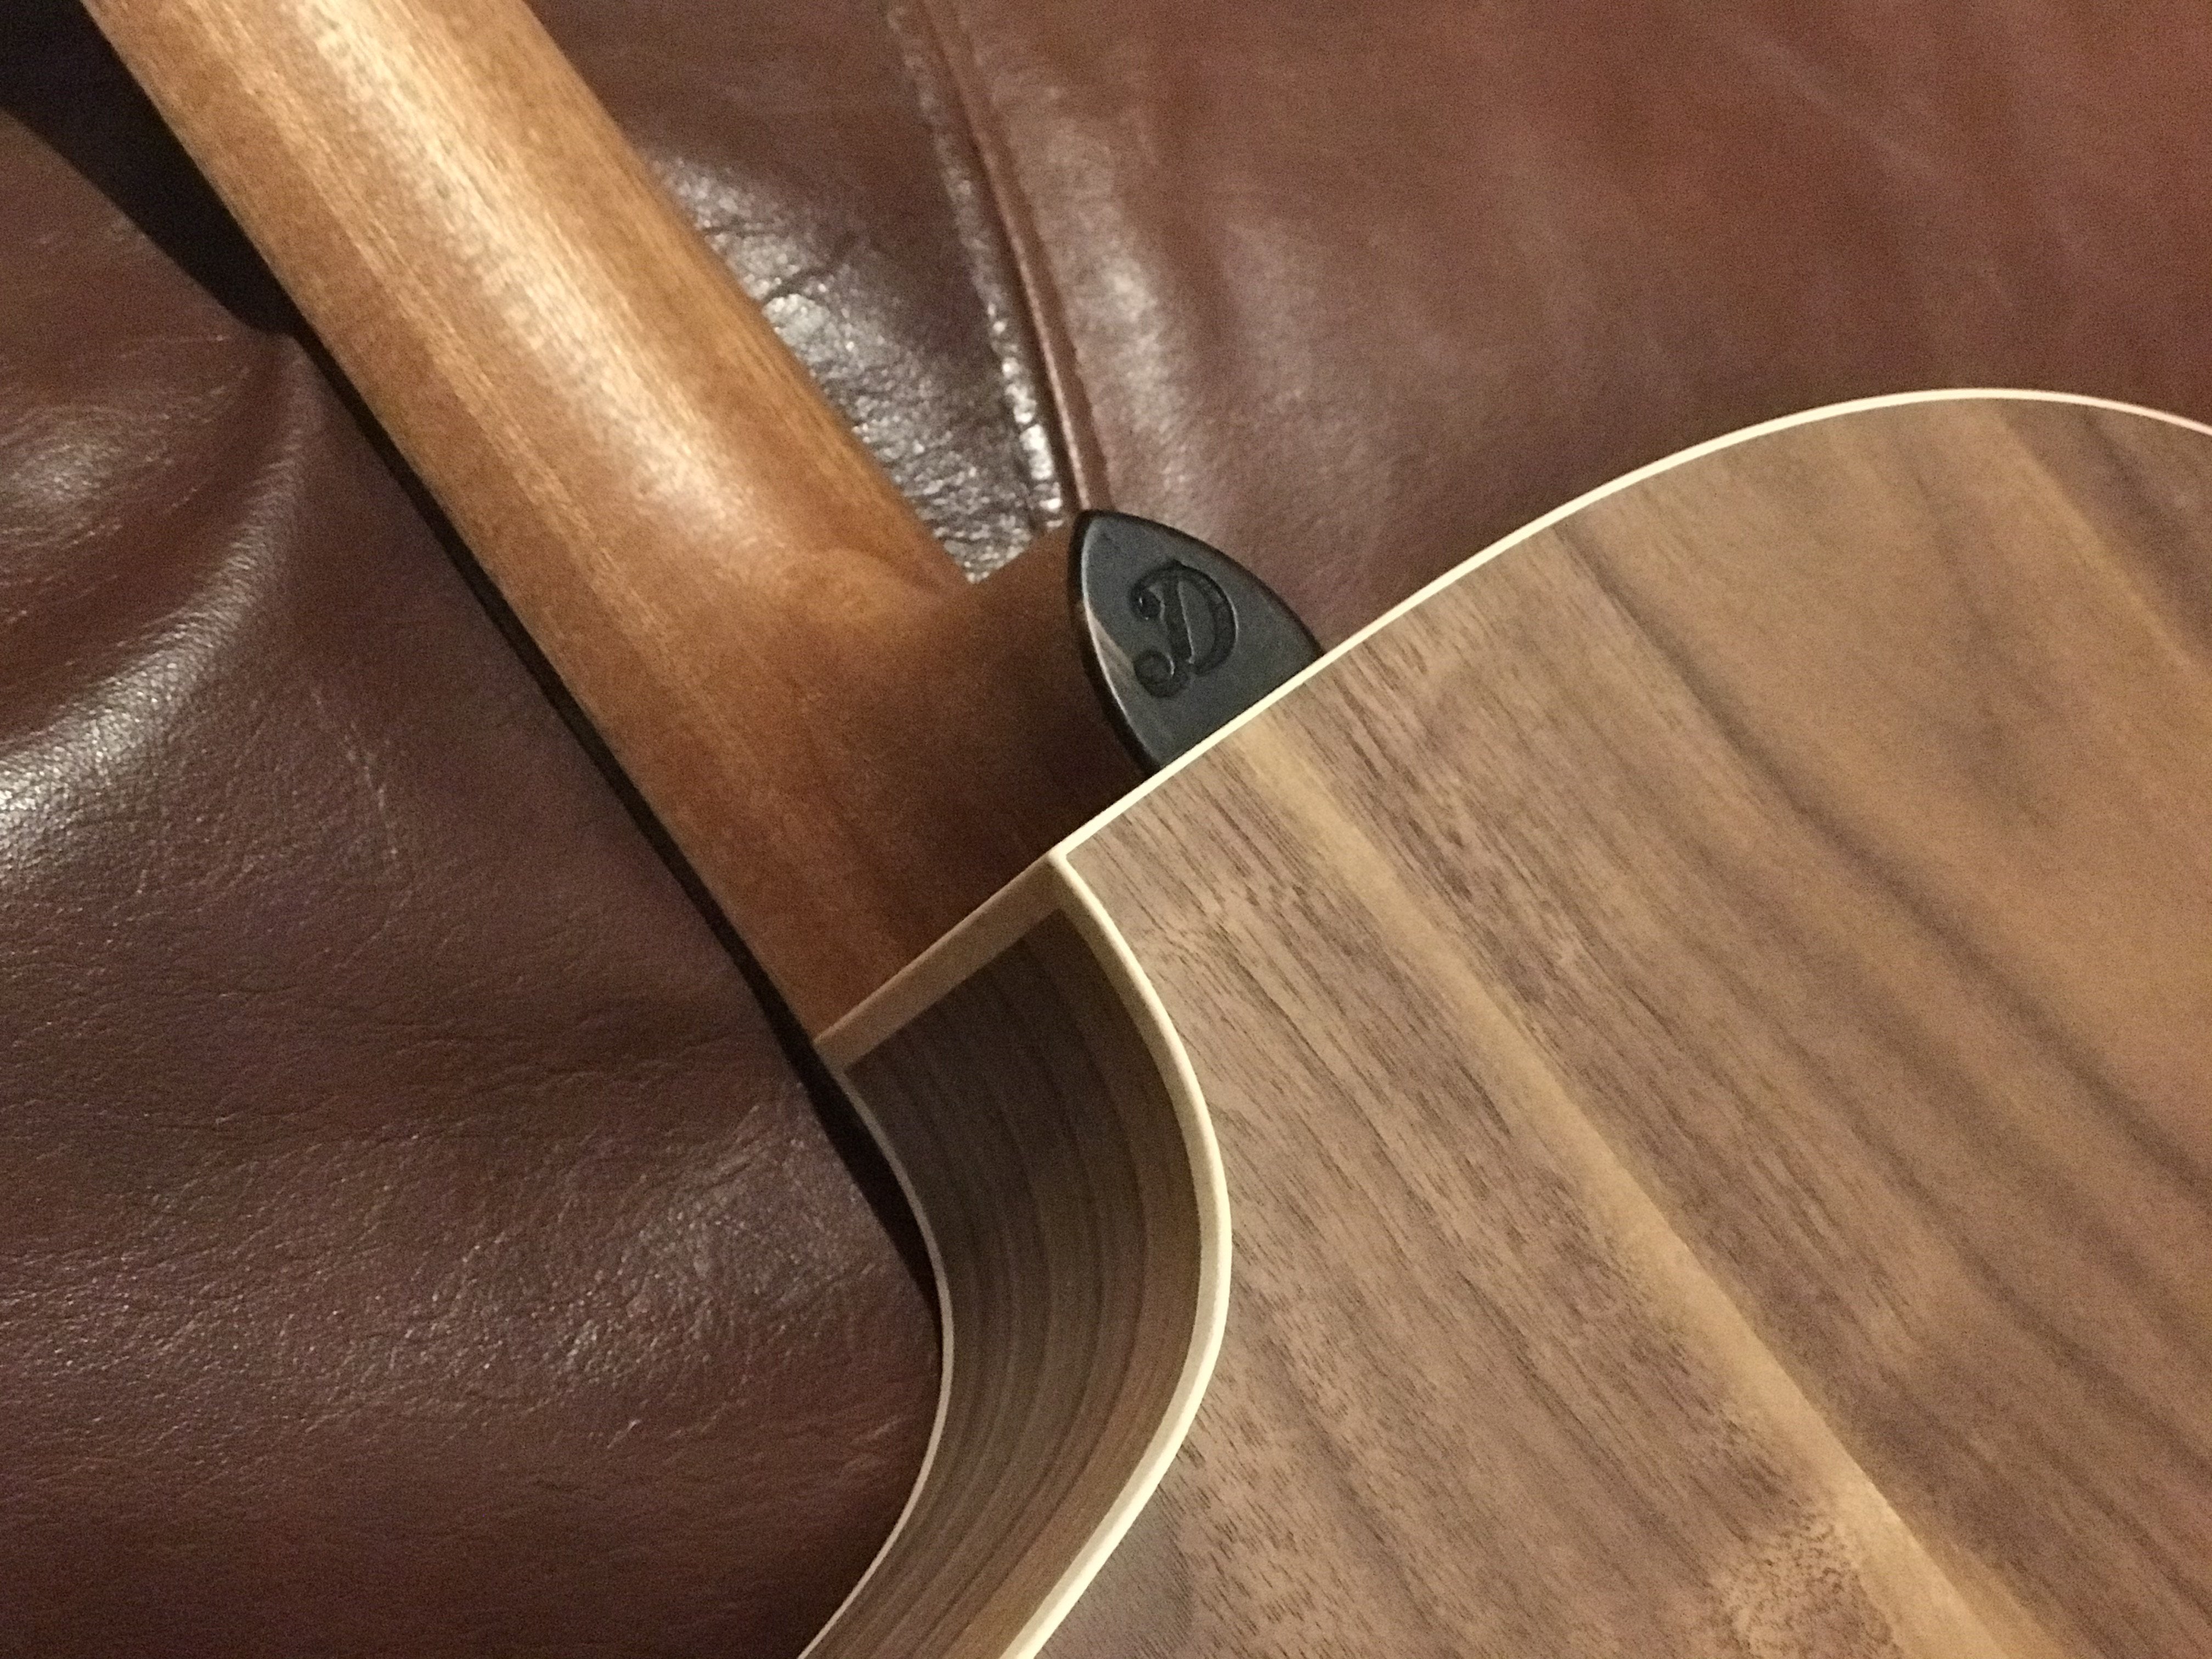 Dowina Walnut GAC Swiss Moon Spruce, Acoustic Guitar for sale at Richards Guitars.